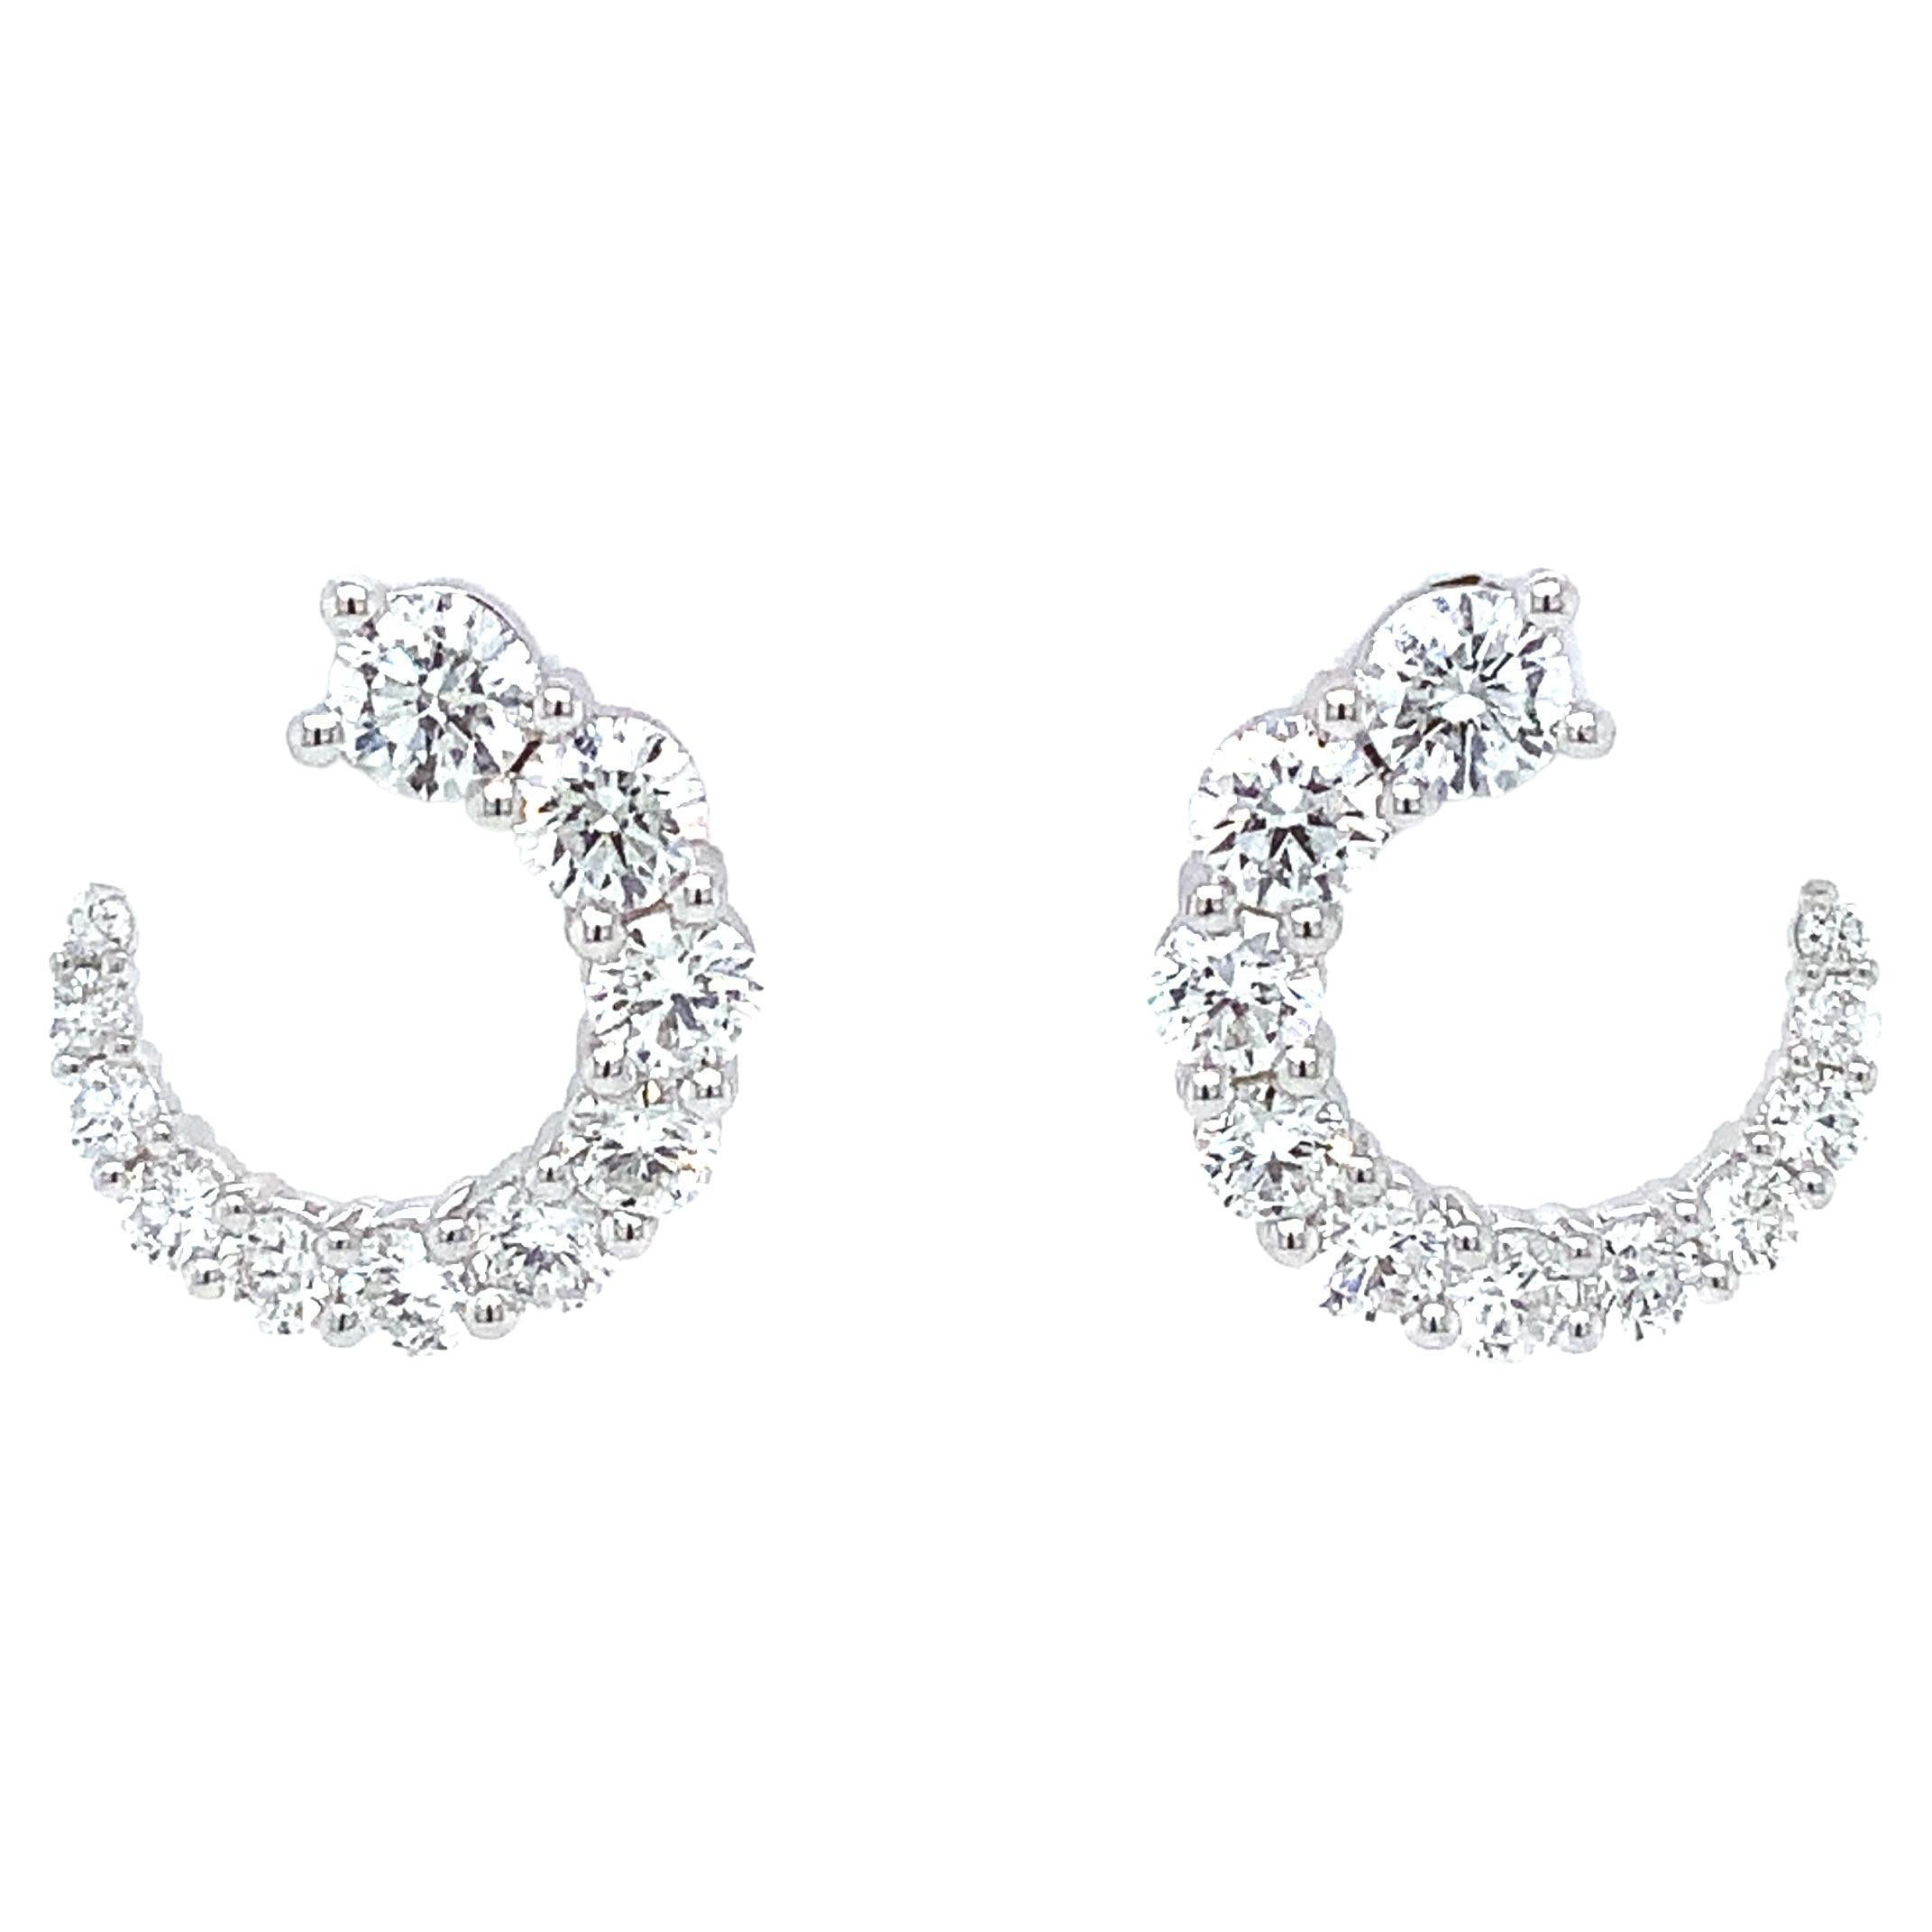 Memoire Luna Wrap Collection Diamond Earring in 18 Karat White Gold 1.30cts T.W For Sale